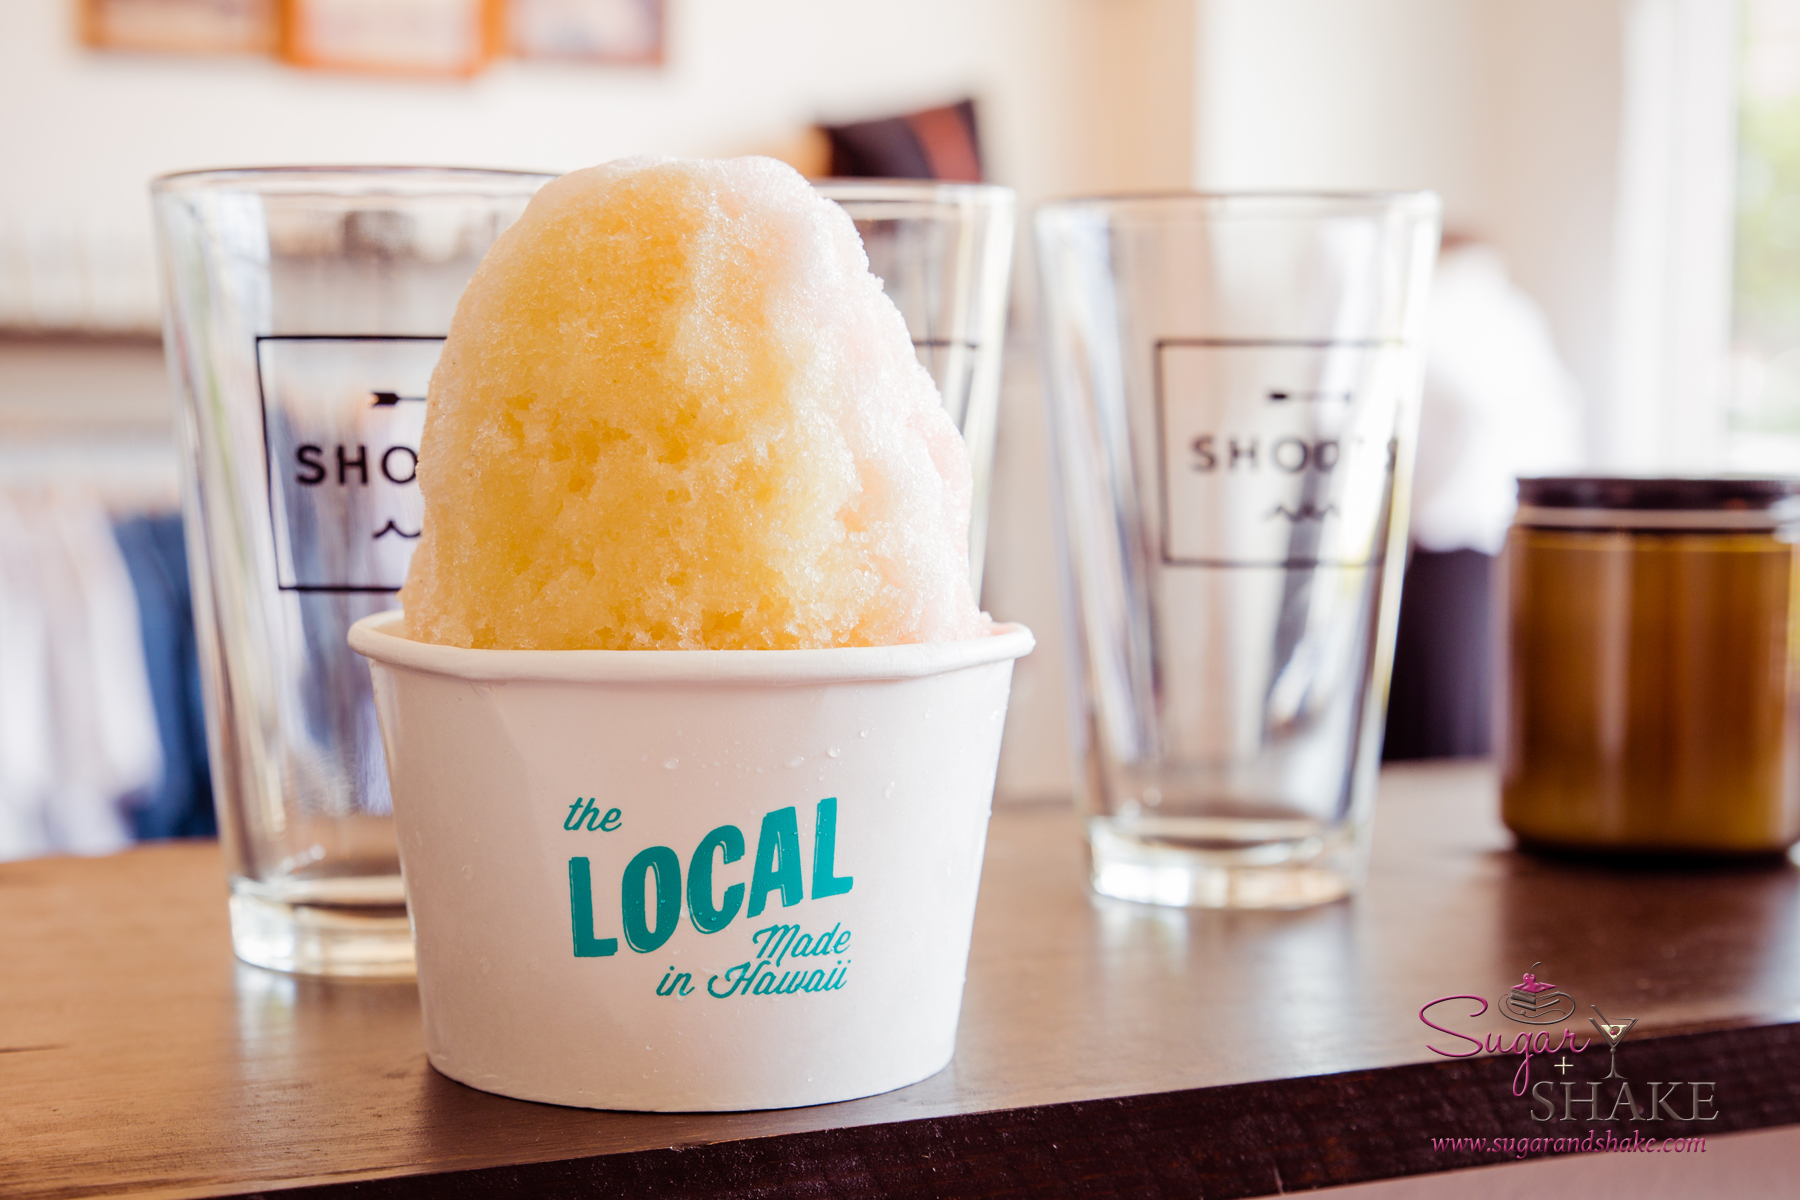 Shave ice at The Local. Ooh, hipster-tastic! © 2015 Sugar + Shake